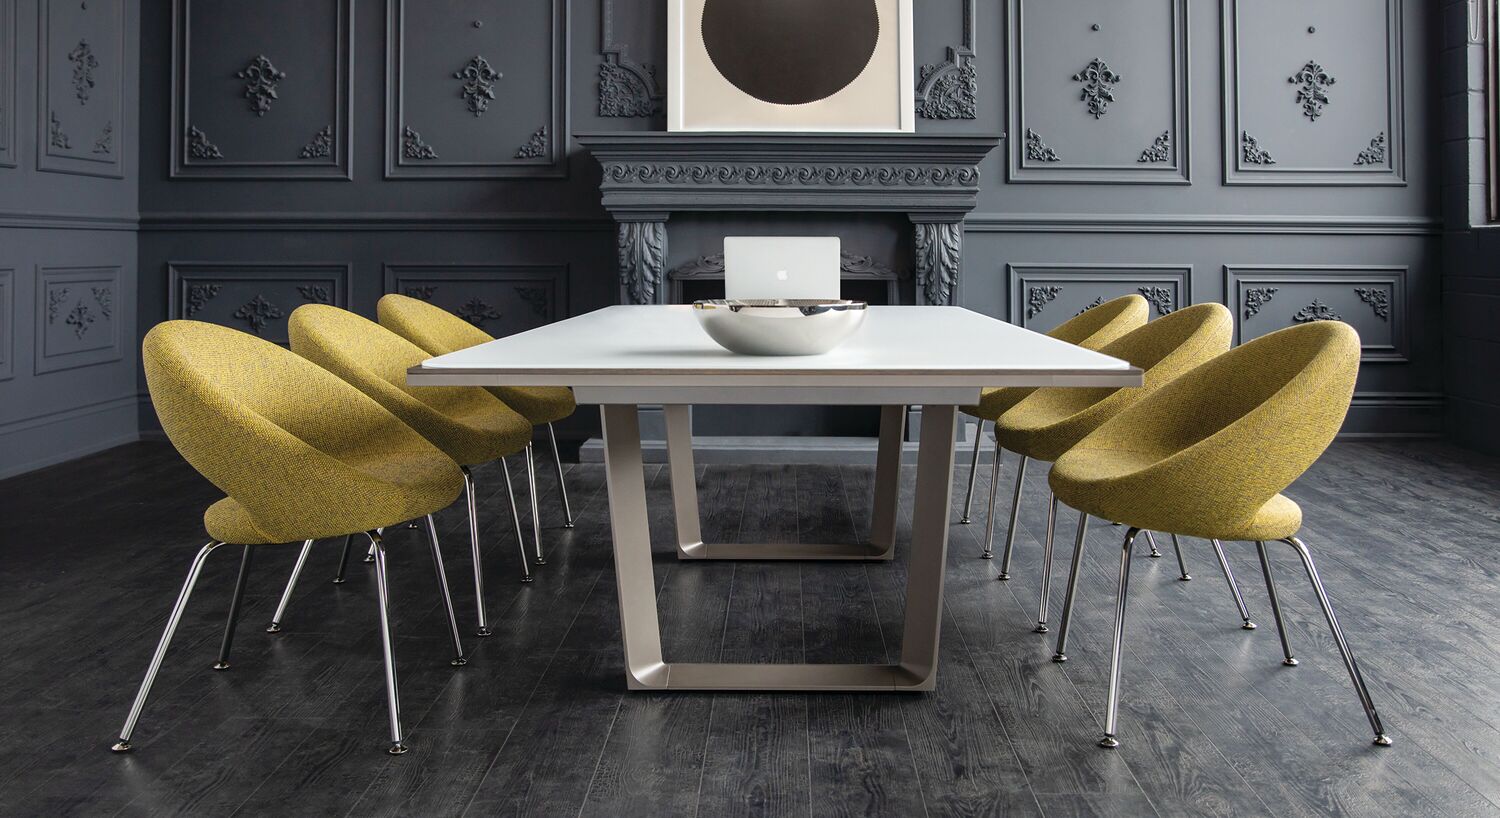 C+D CONFERENCE TABLE